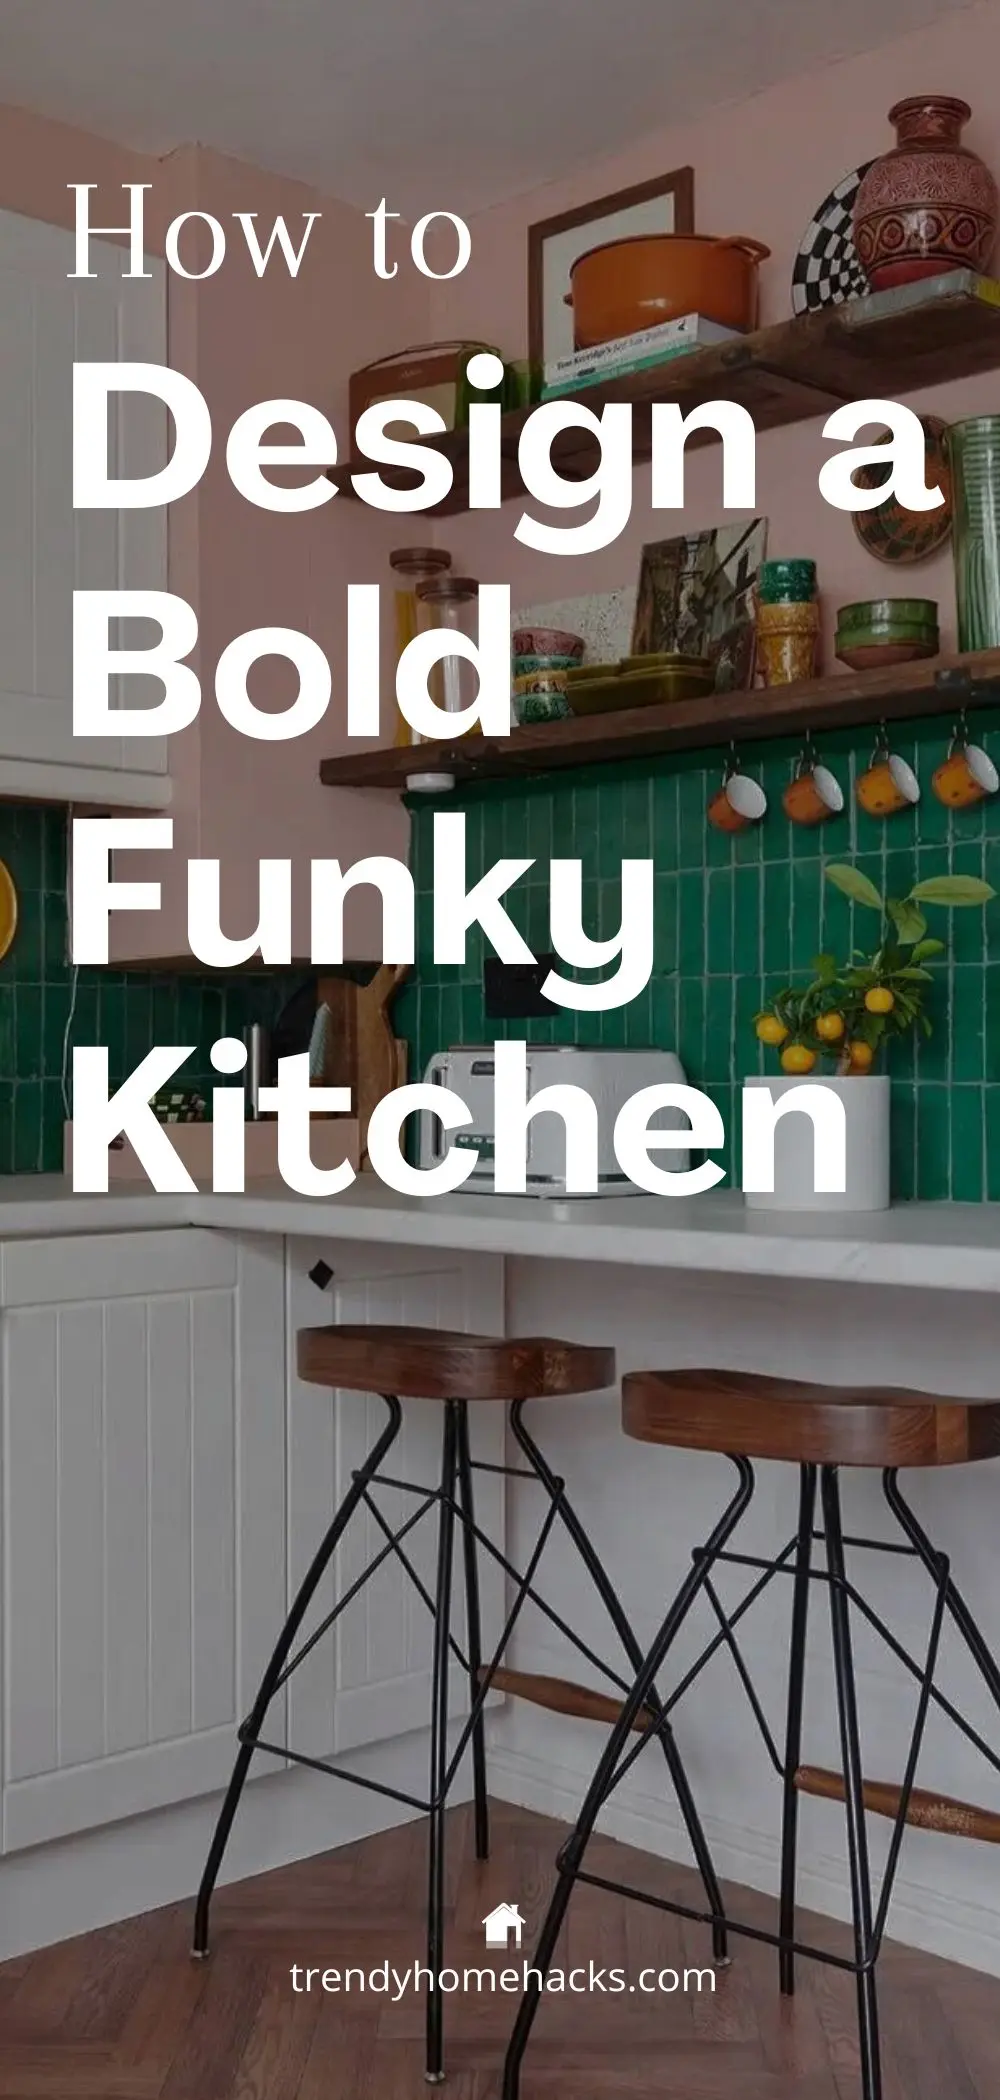 a ready made tall pinterest pin is useful to pin content to pinterest for easy access later. the pin comes with a text overlay "How to design a bold funky kitchen."